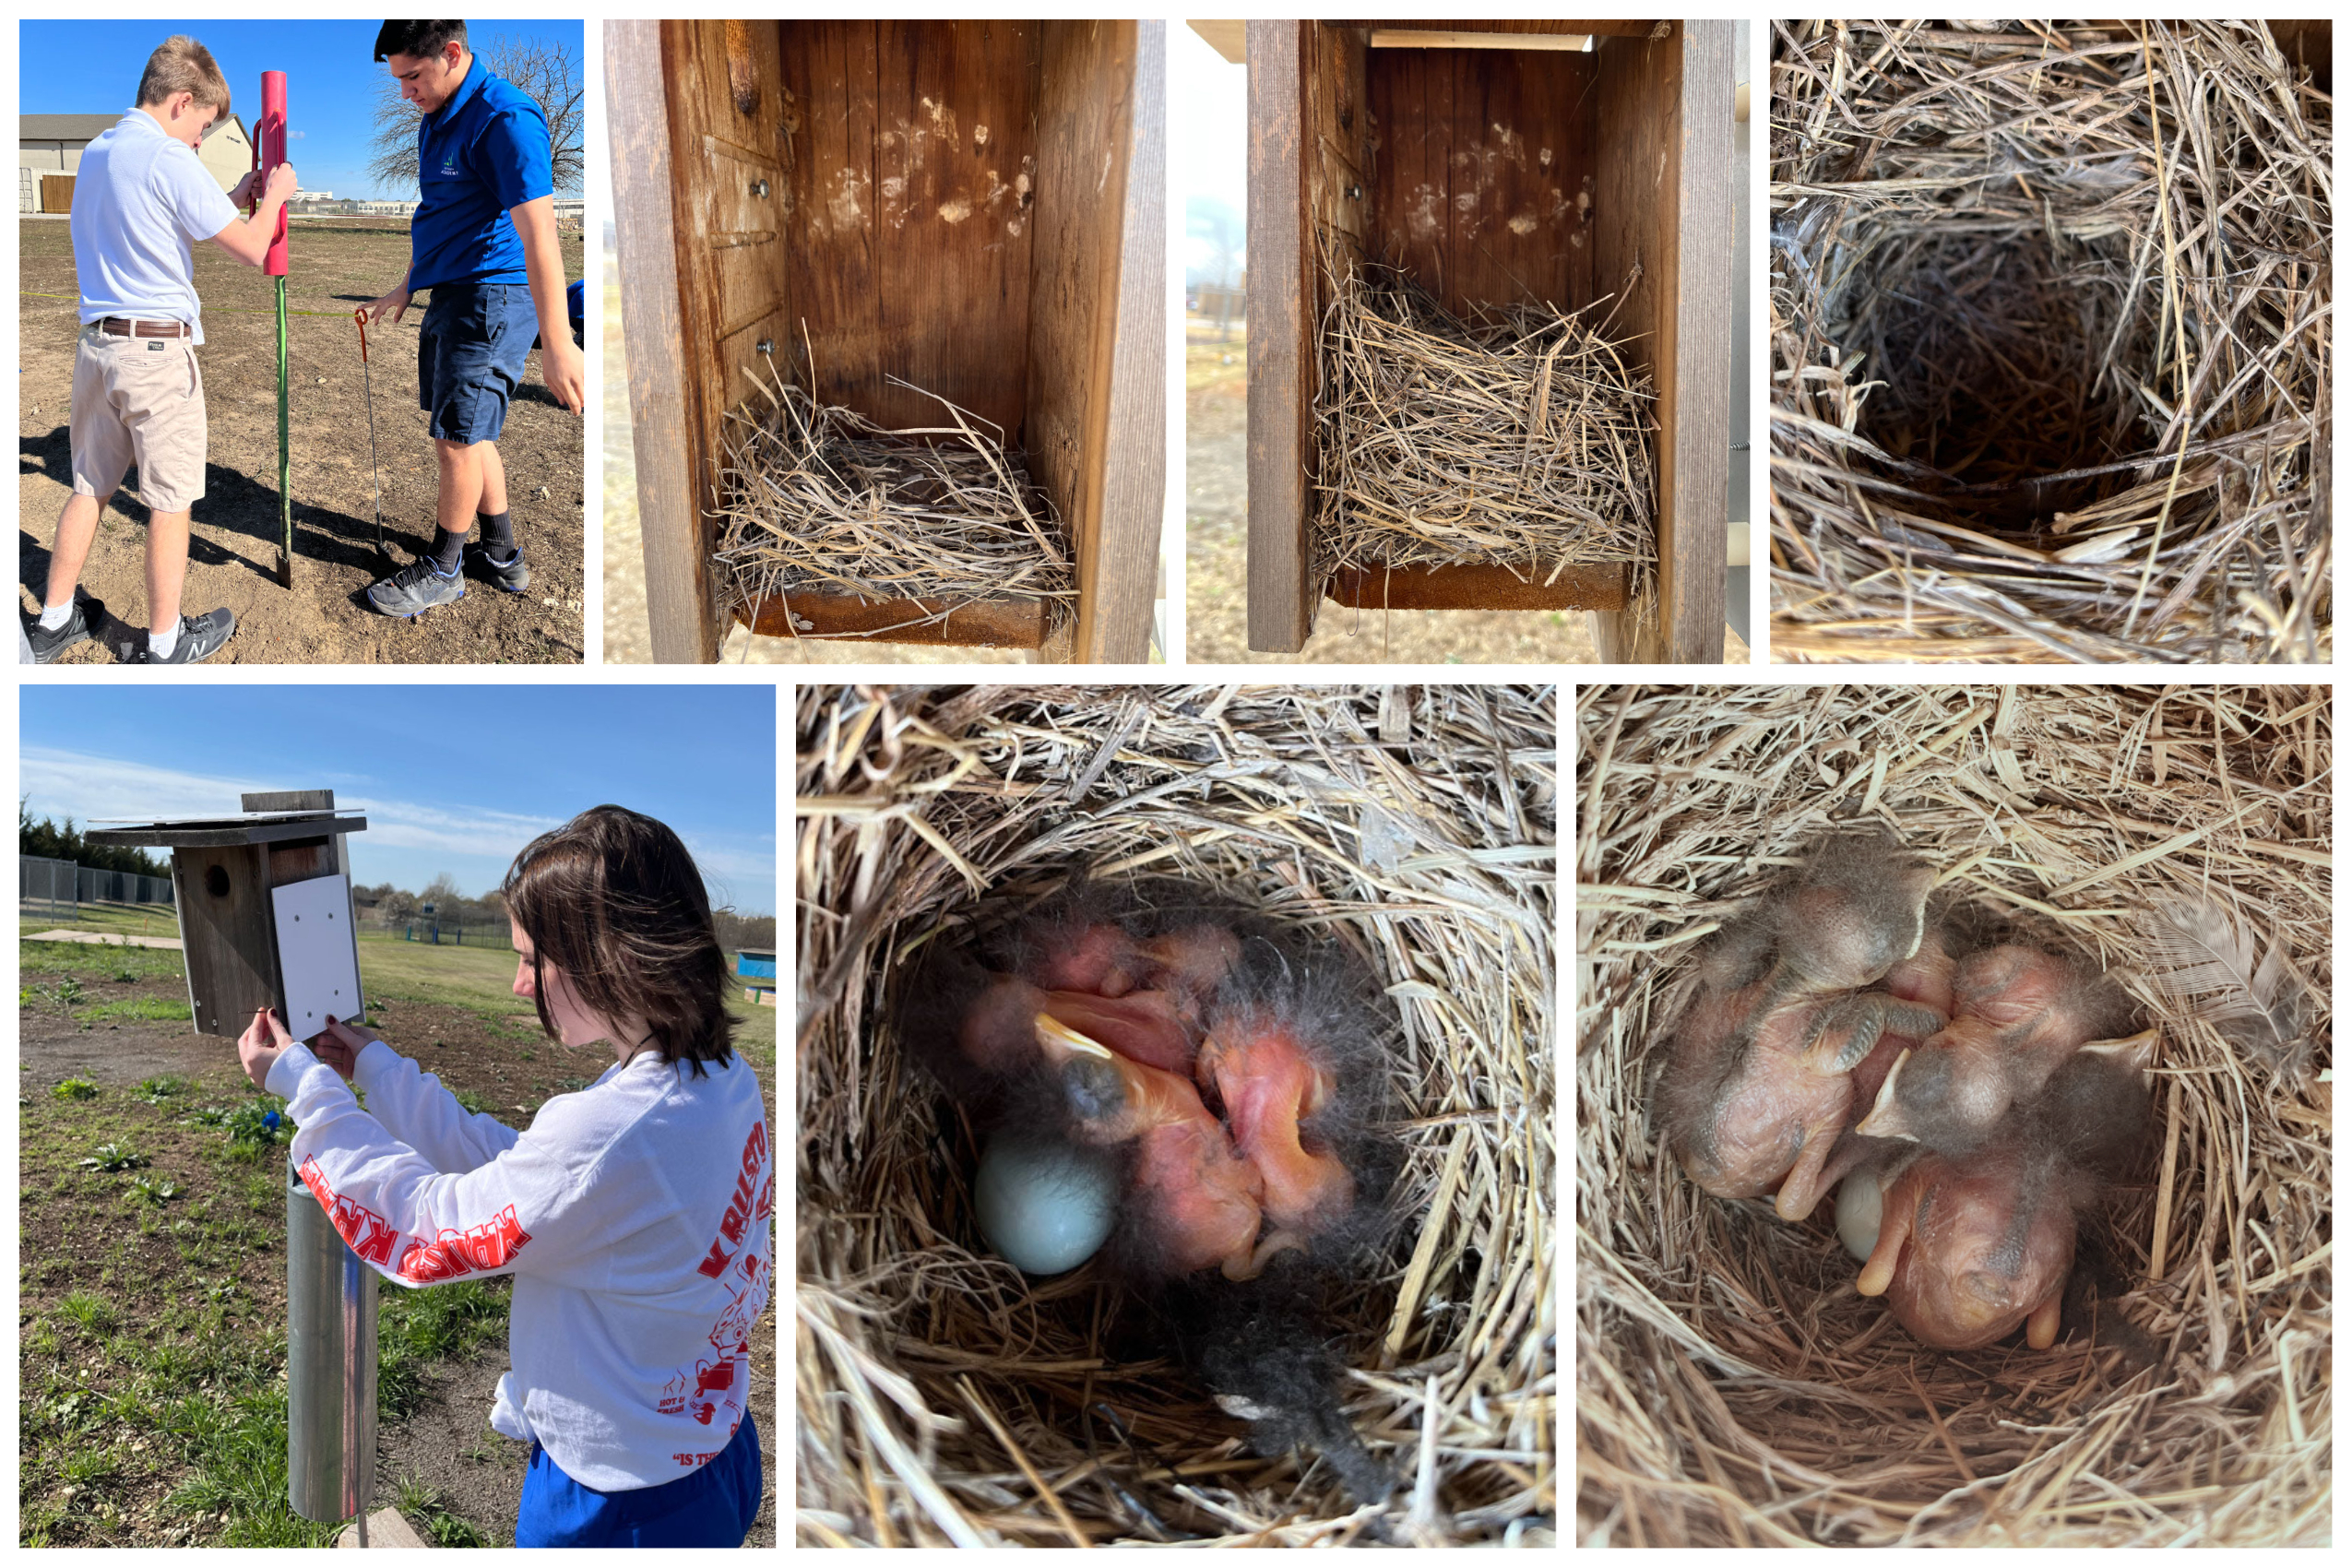 bluebird nest monitoring progress by students at Fort Worth Academy